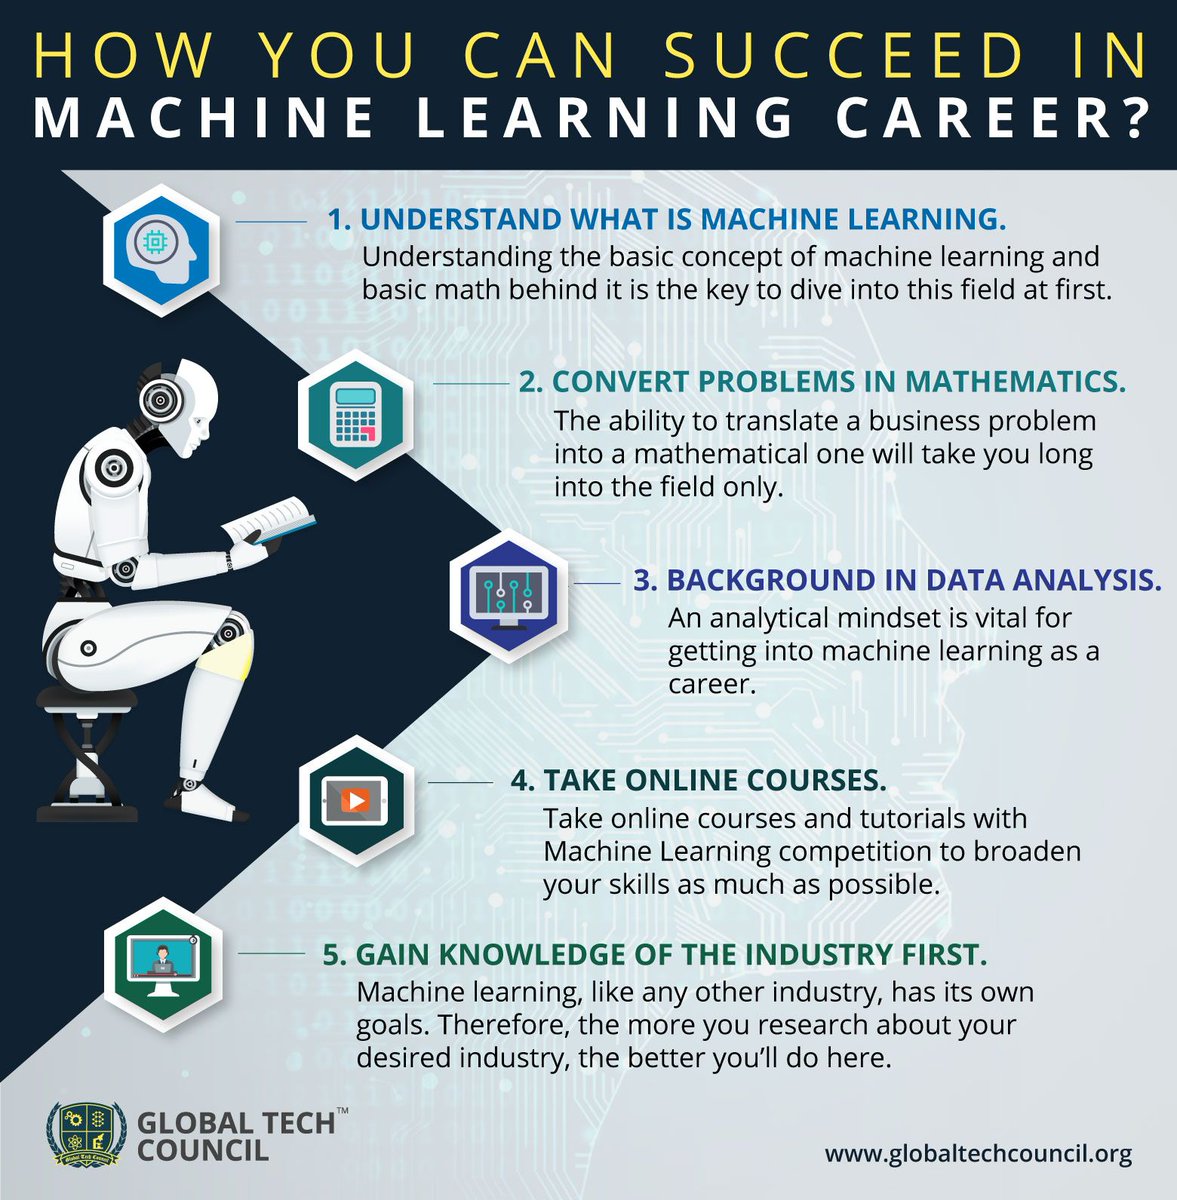 #DemandforMachineLearning Engineers is going to keep increasing exponentially. Here are 5 #skills you need to #succeed in the incredibly exciting field.
#MachineLearning #Career #CareerInMachineLearning #Technology #Jobs #MachineLearningEngineers #LearnTechnology